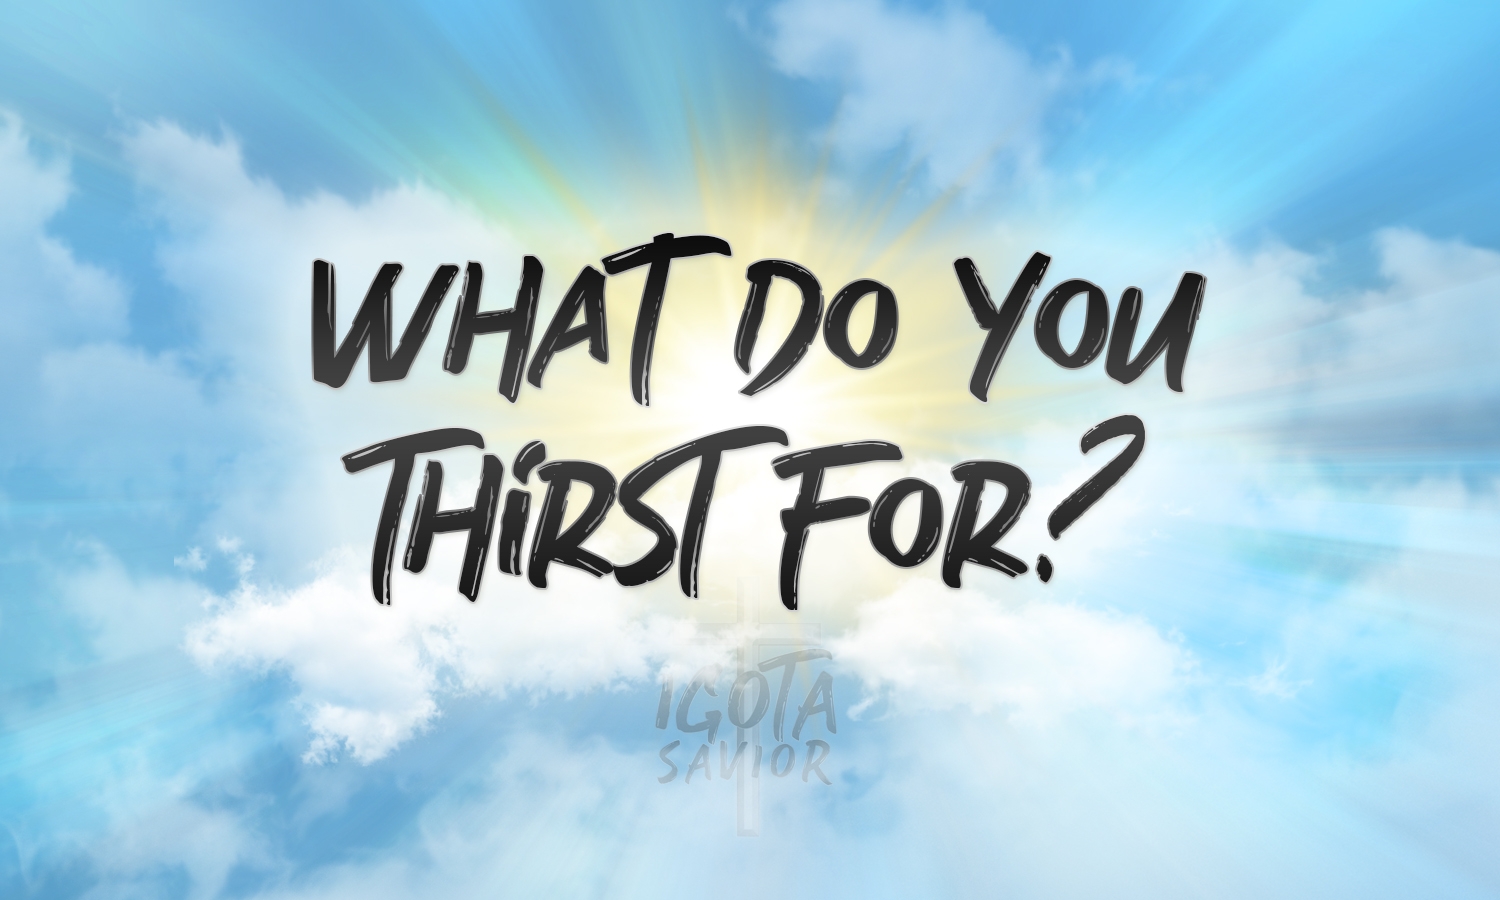 What Do You Thirst For?